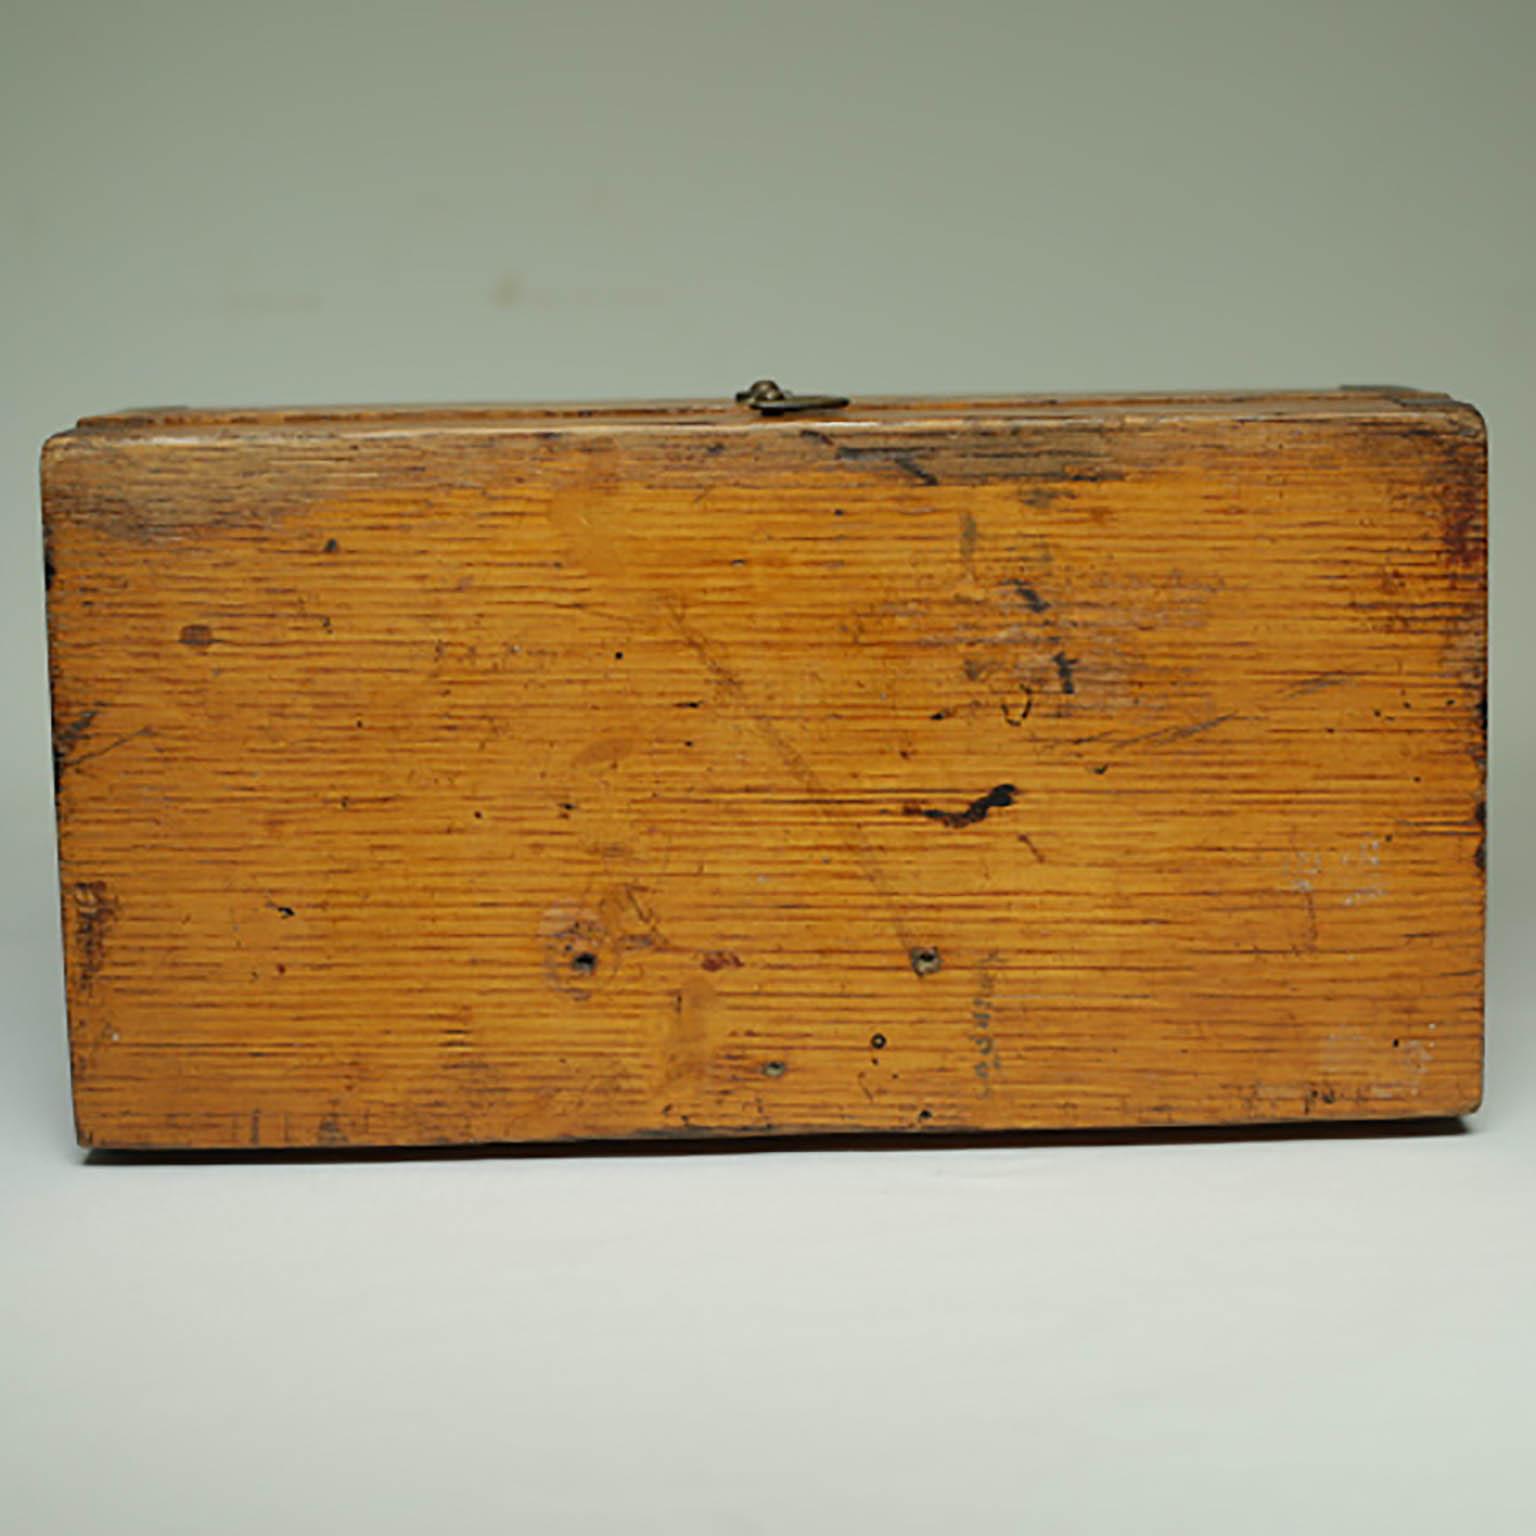 Vintage Wooden Box with Dovetails Joints, circa 1880s-1920s 2